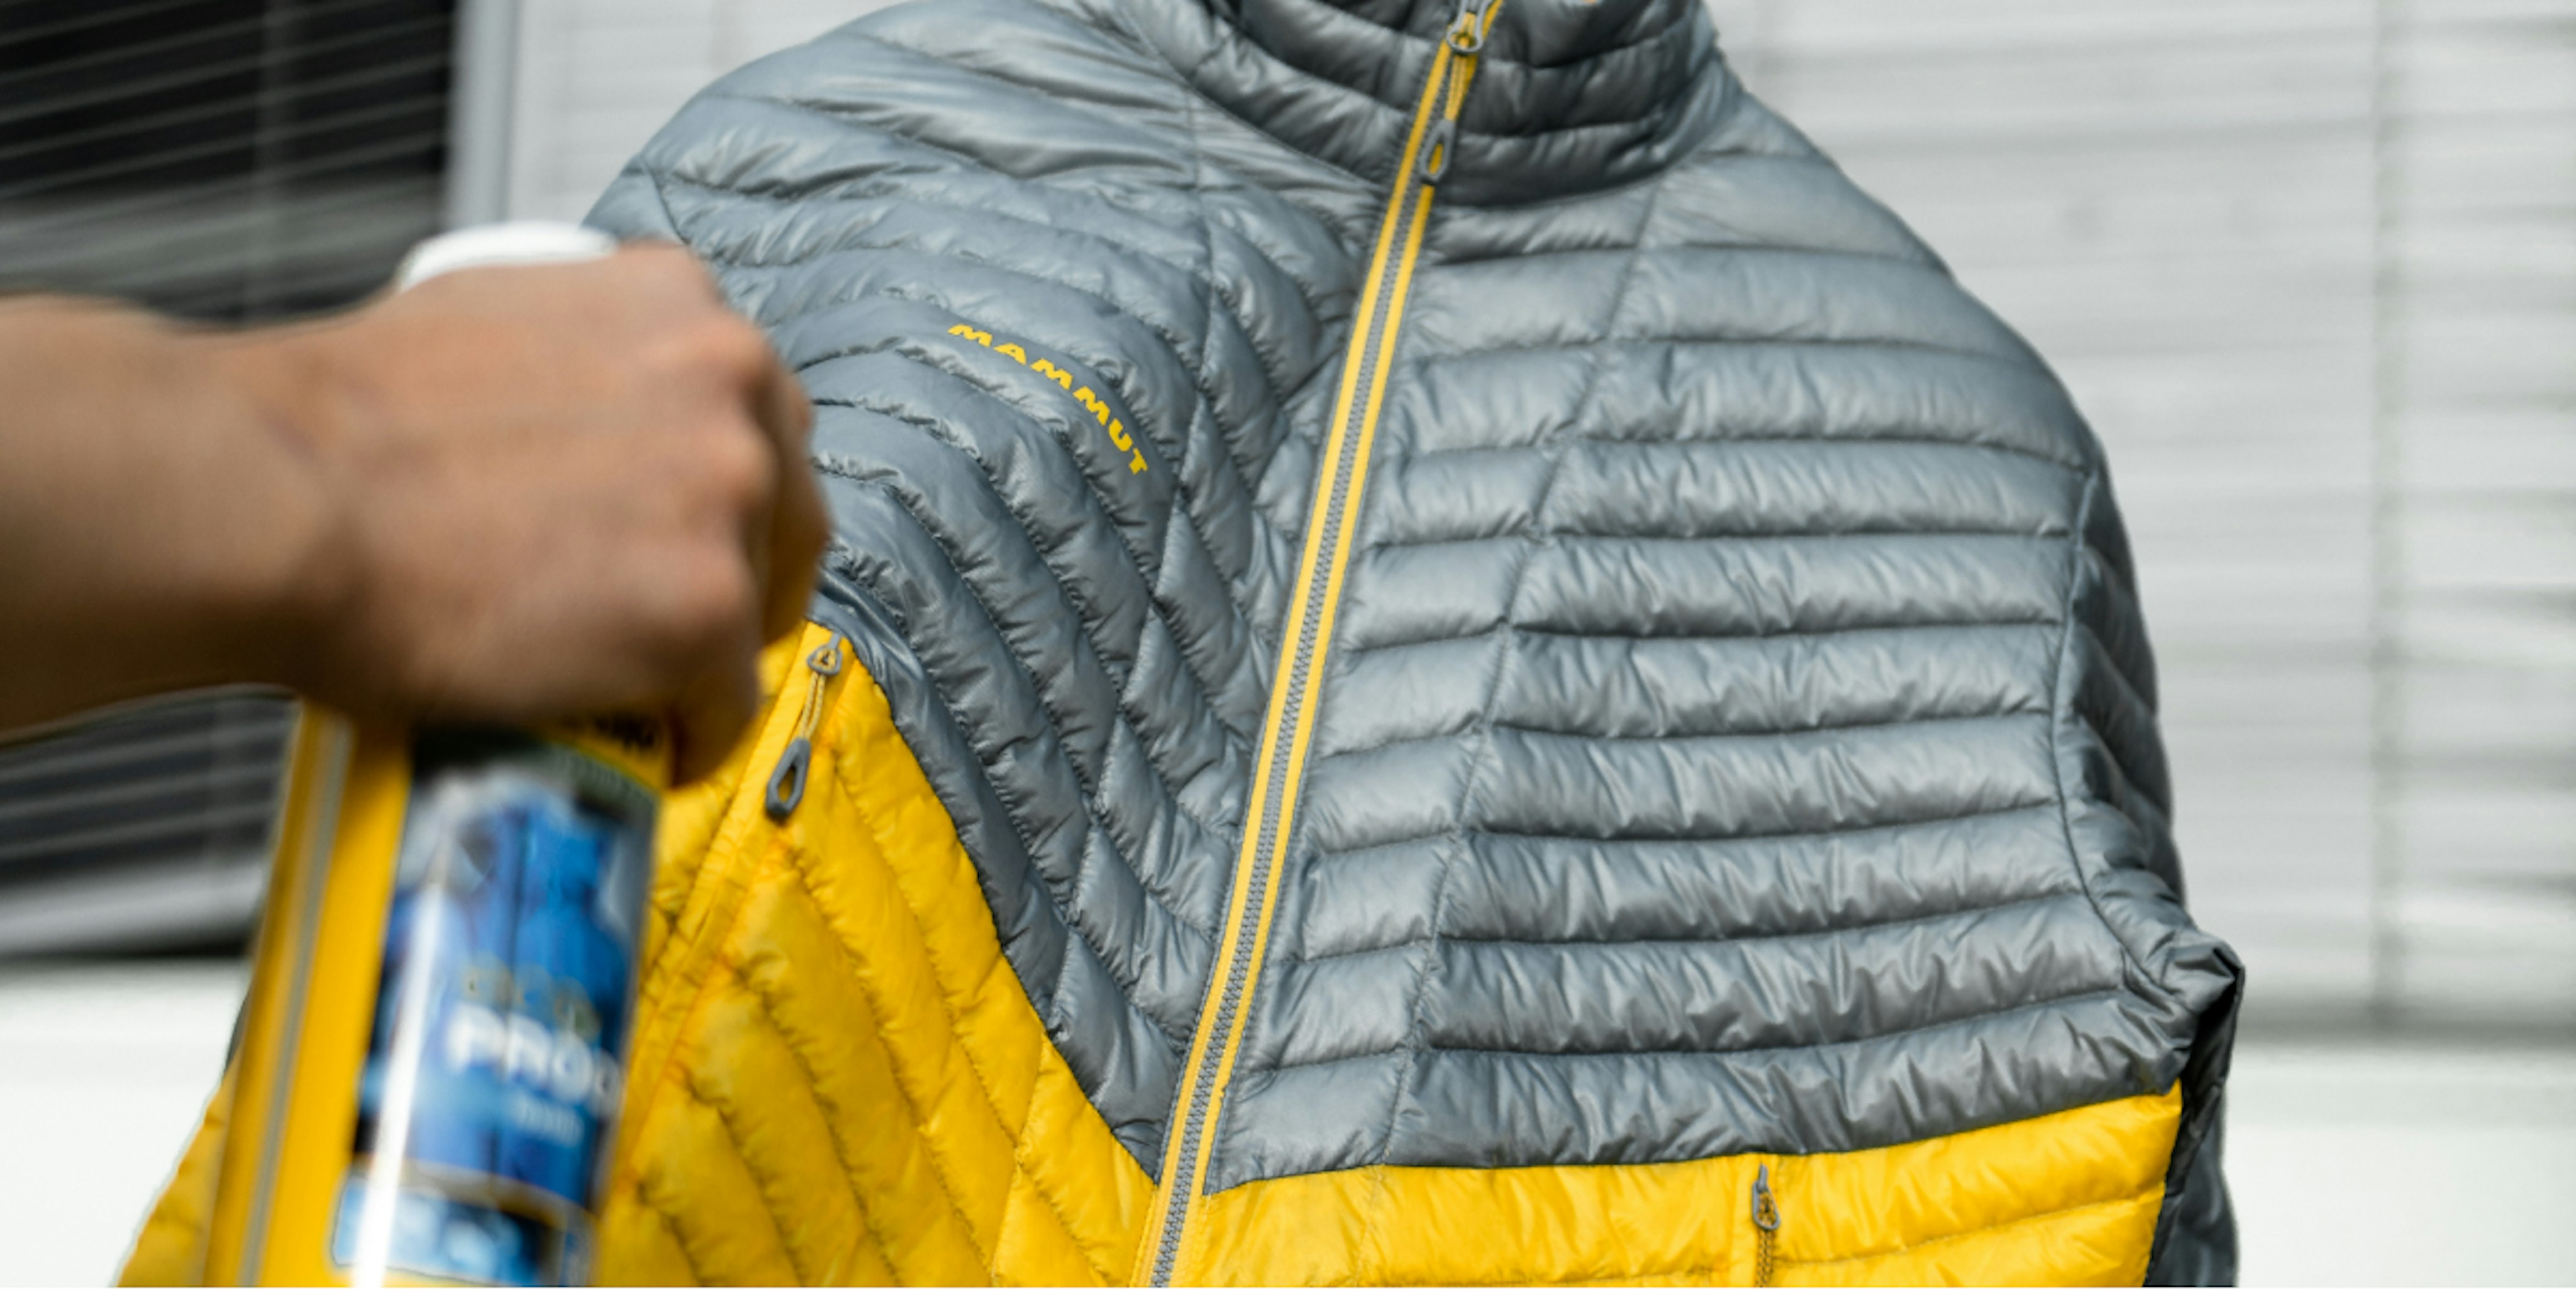 A technician spray coating a gray and yellow Mammut insulated jacket hanging on a rack, ensuring enhanced water resistance for outdoor adventures.